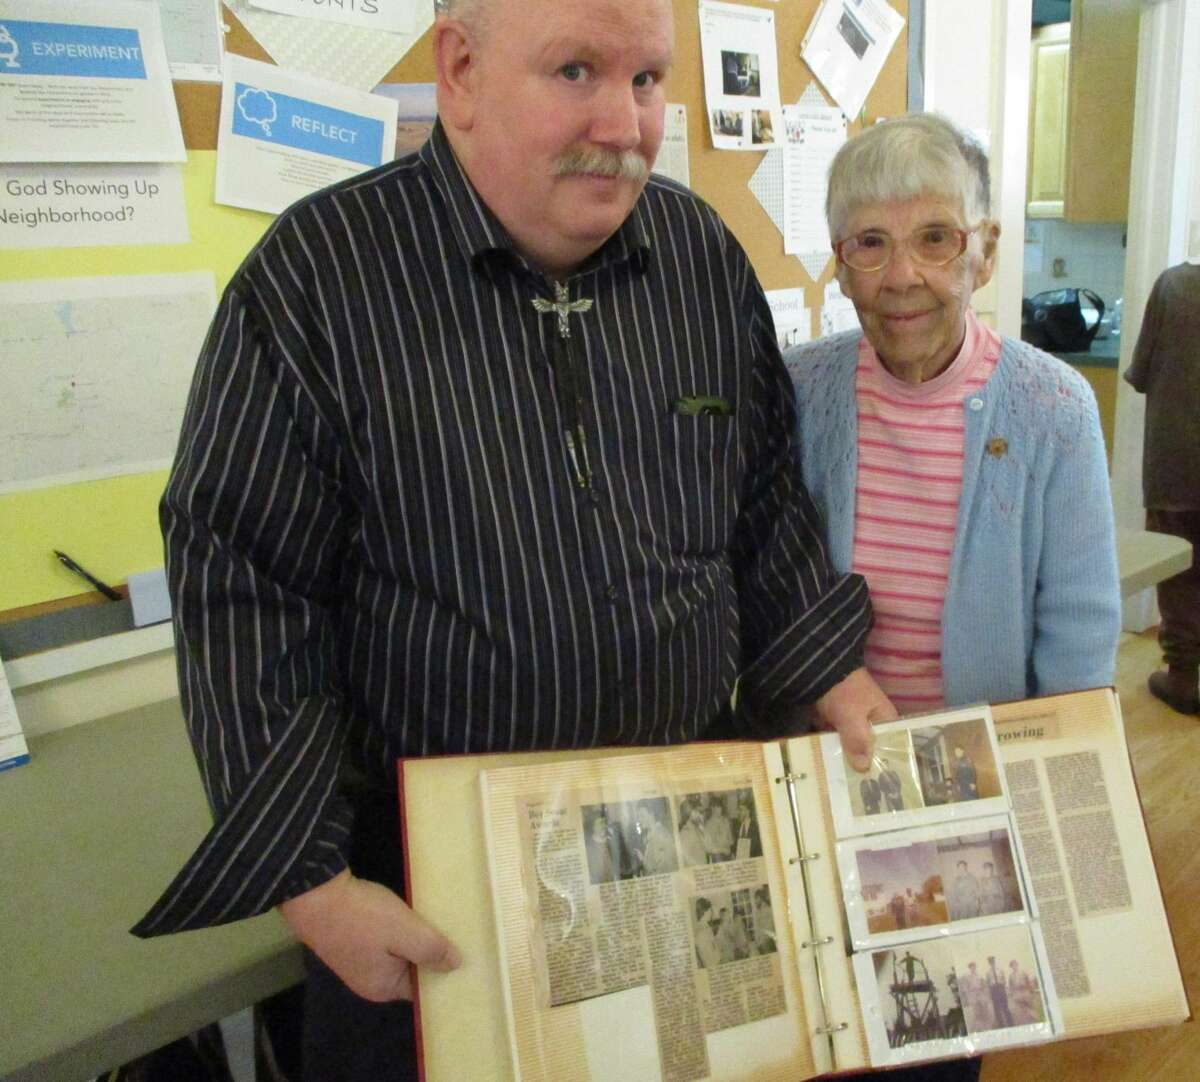 David Maddox, Senior Warden of Christ Church, and his mother Evelyn Maddox, display one of her scrapbooks from her days as a girl scout.